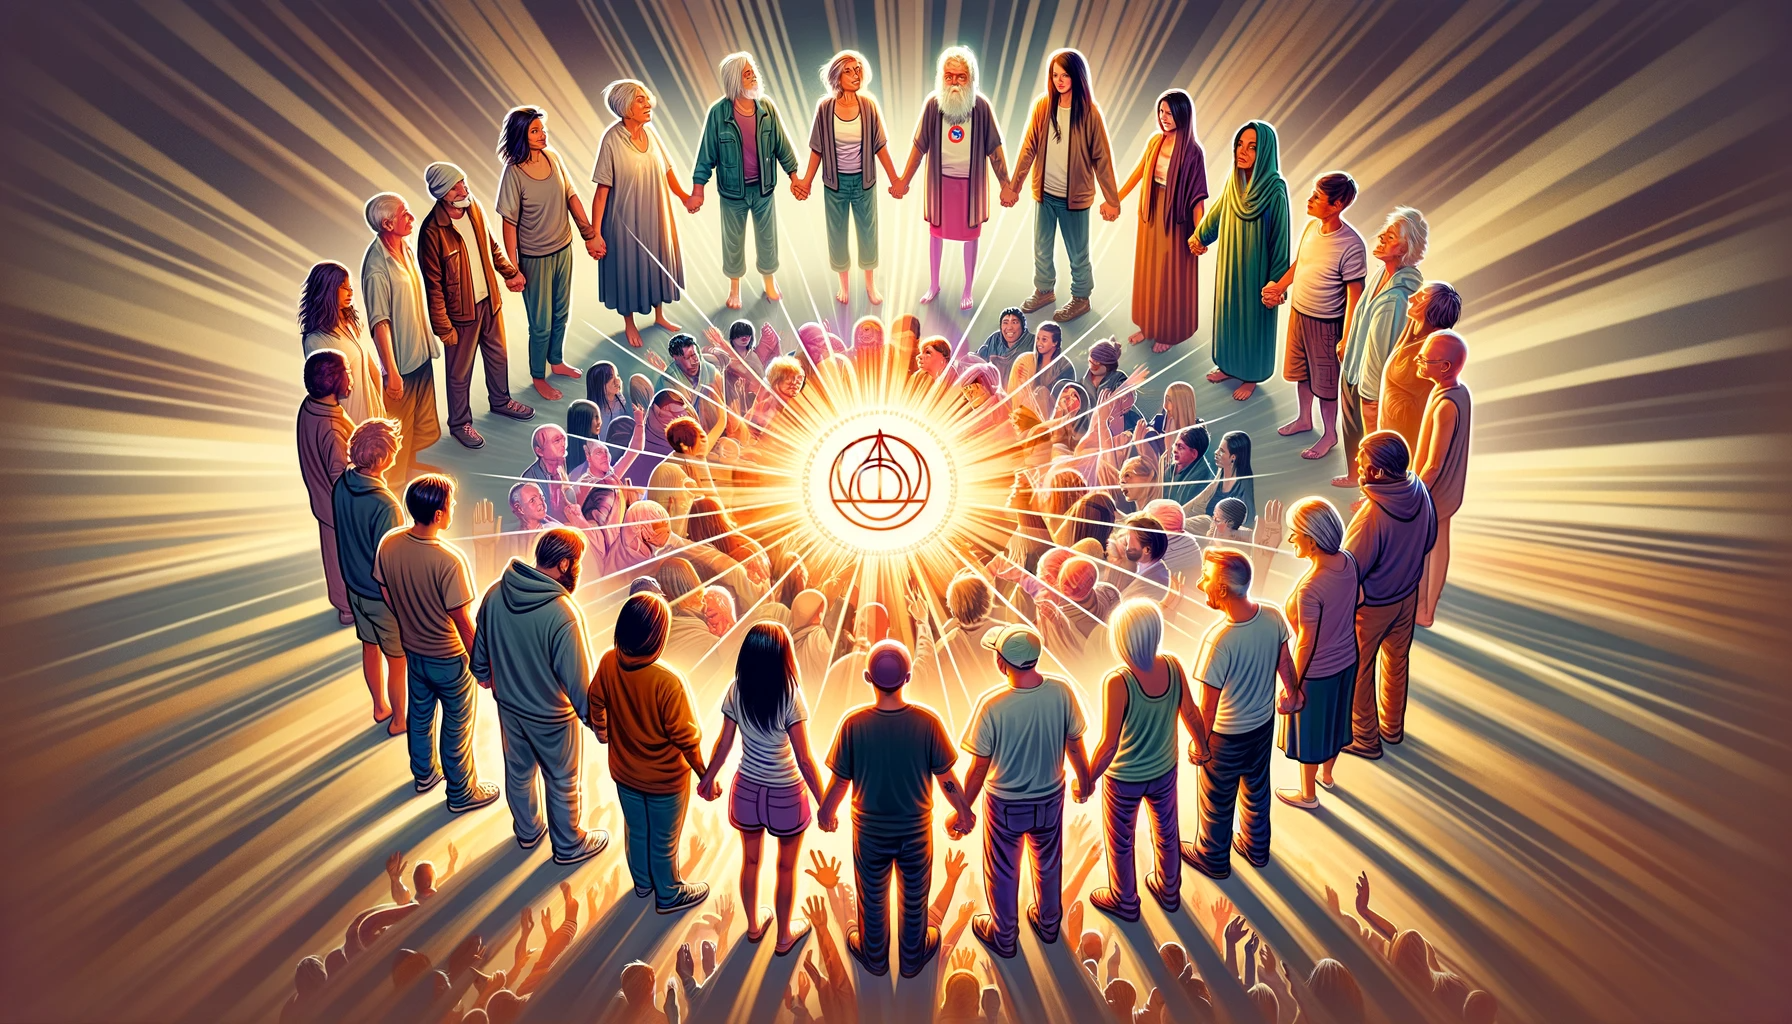 A 16x9 format illustration capturing the essence of unity and diversity within the Narcotics Anonymous community. The image shows a circle of people f